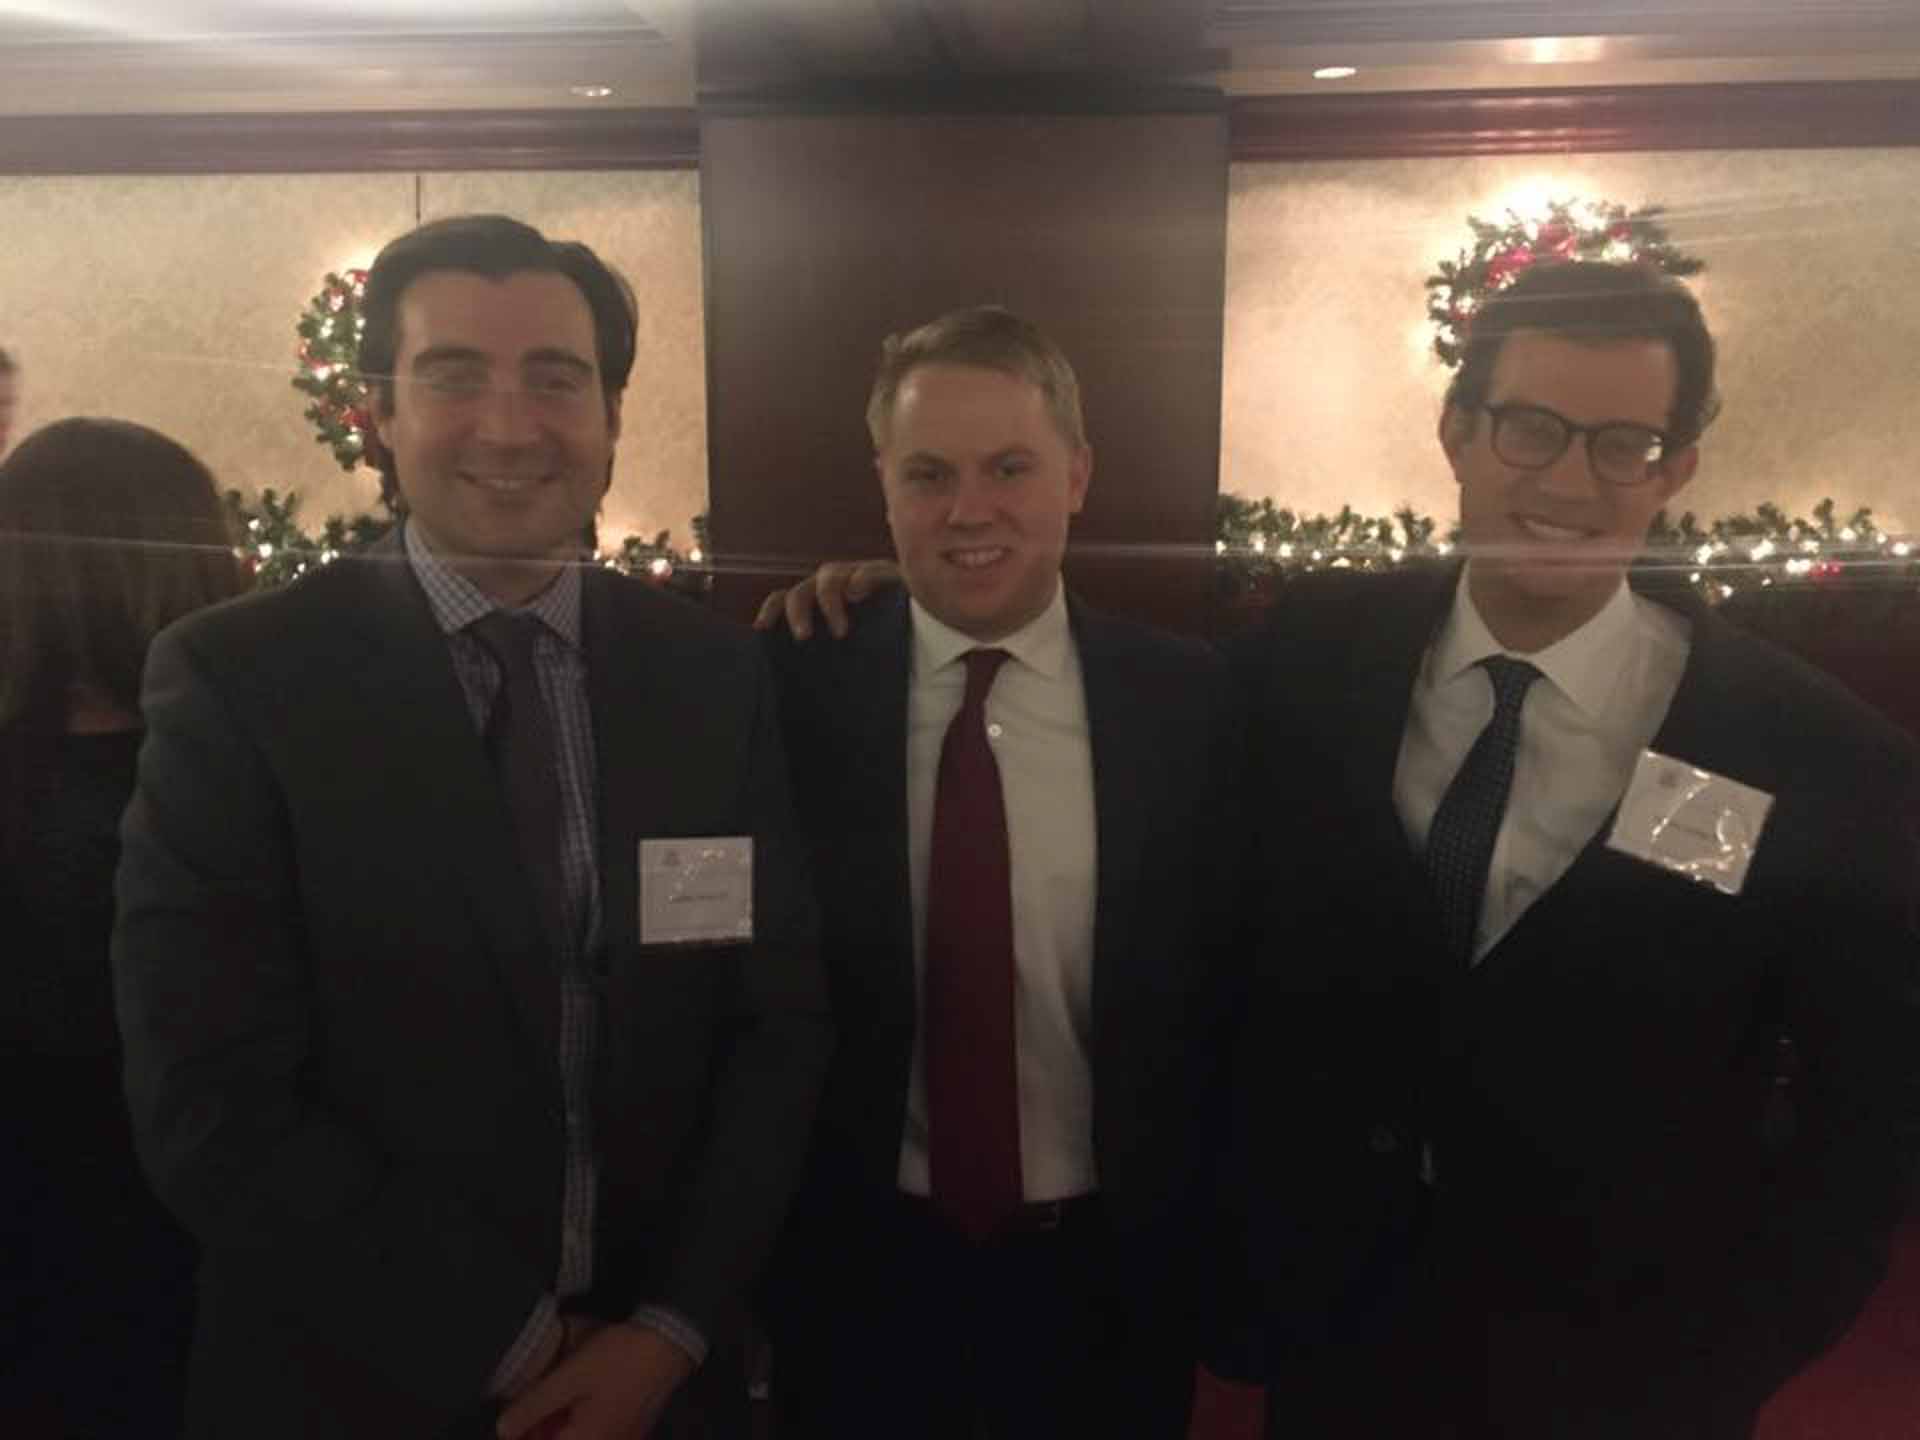 law-association-christmas-social-2019-three-people-smile-looking-into-camera